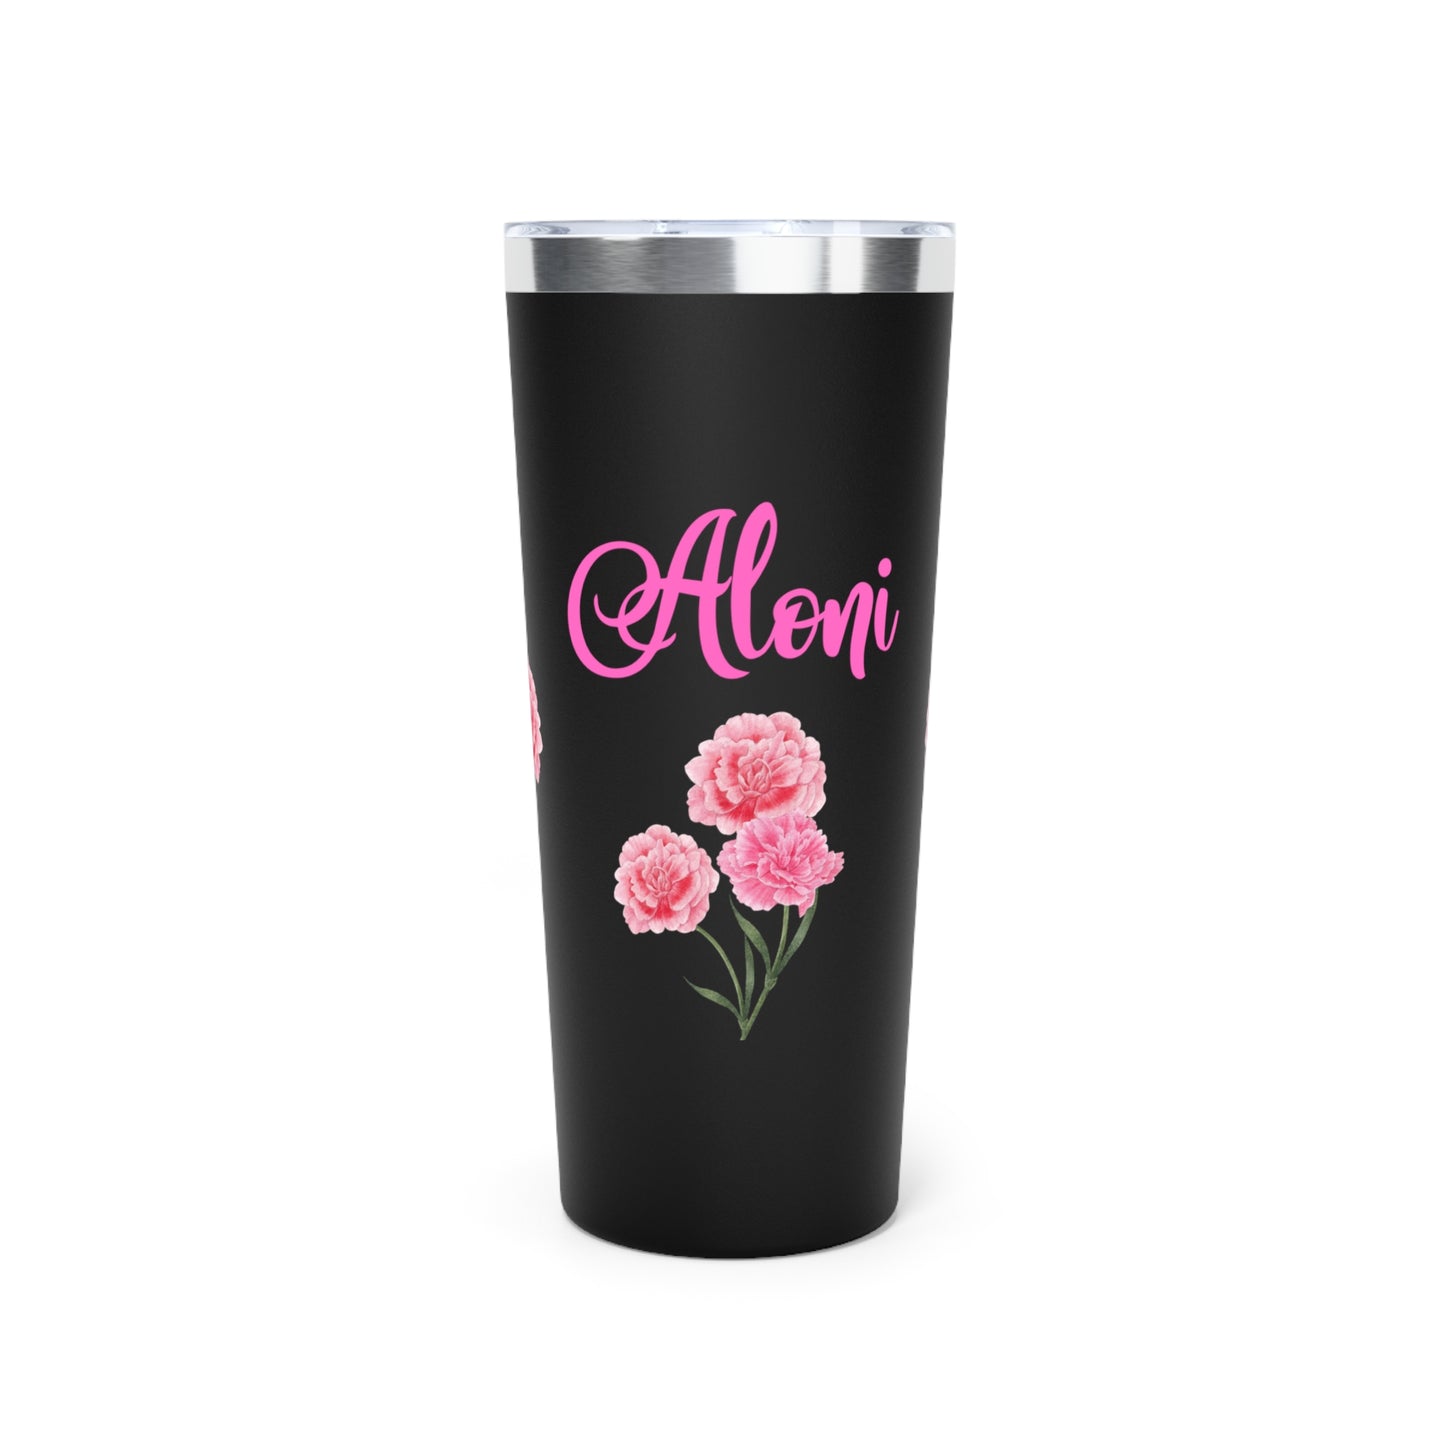 Personalized Birth Flower Tumbler, Personalized Birth Flower Coffee Cup With Name, Gifts for Her, Bridesmaid Proposal, Party Favor